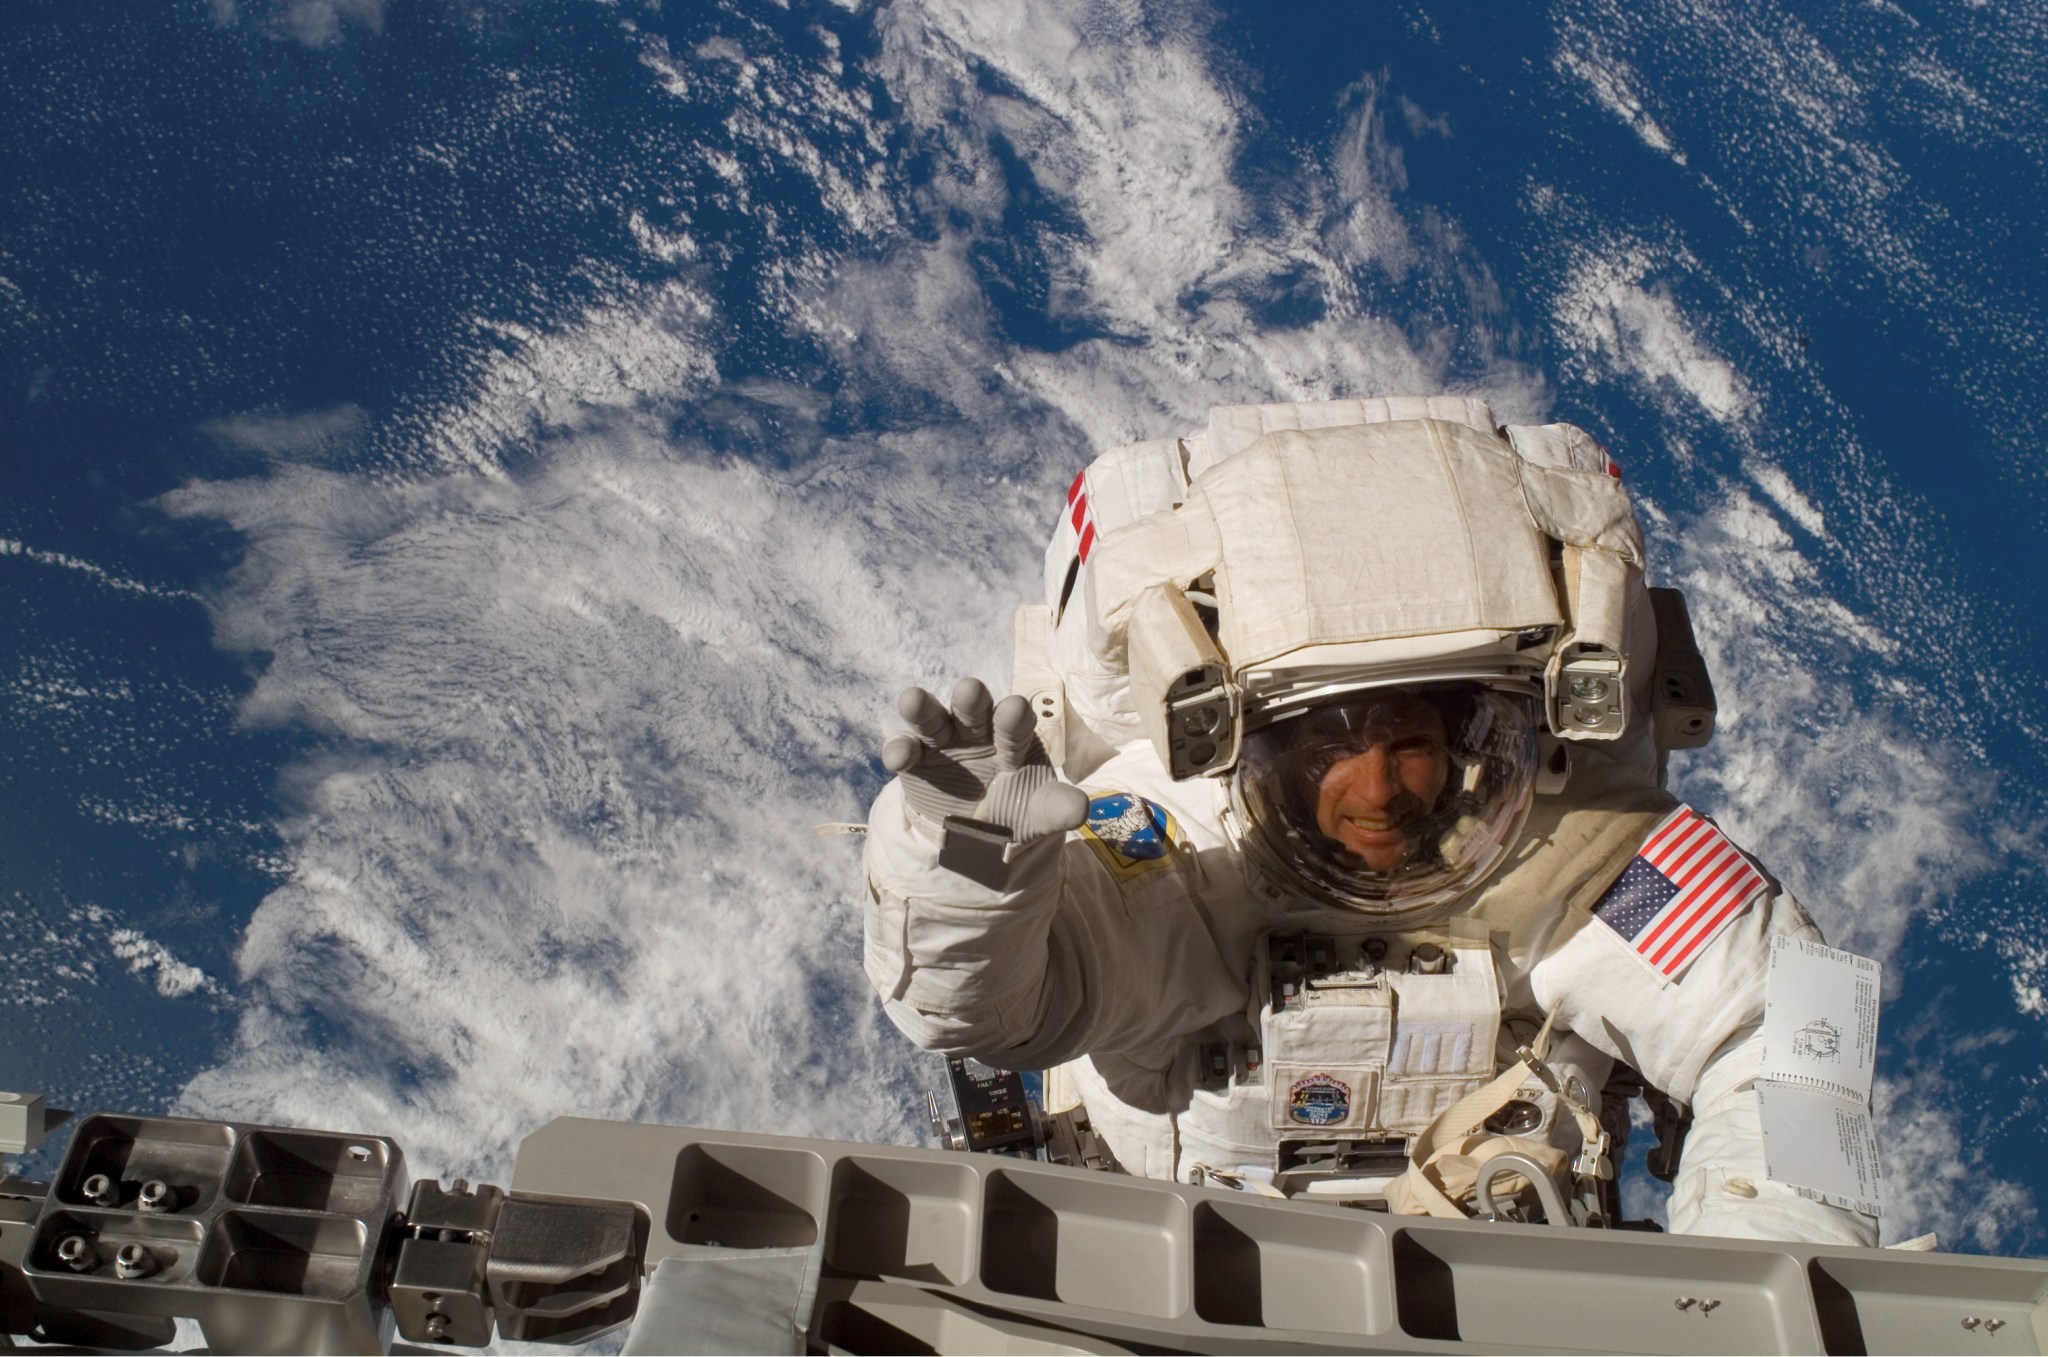 An astronaut dressed in a large, bulky spacesuit waves to the camera while working in space